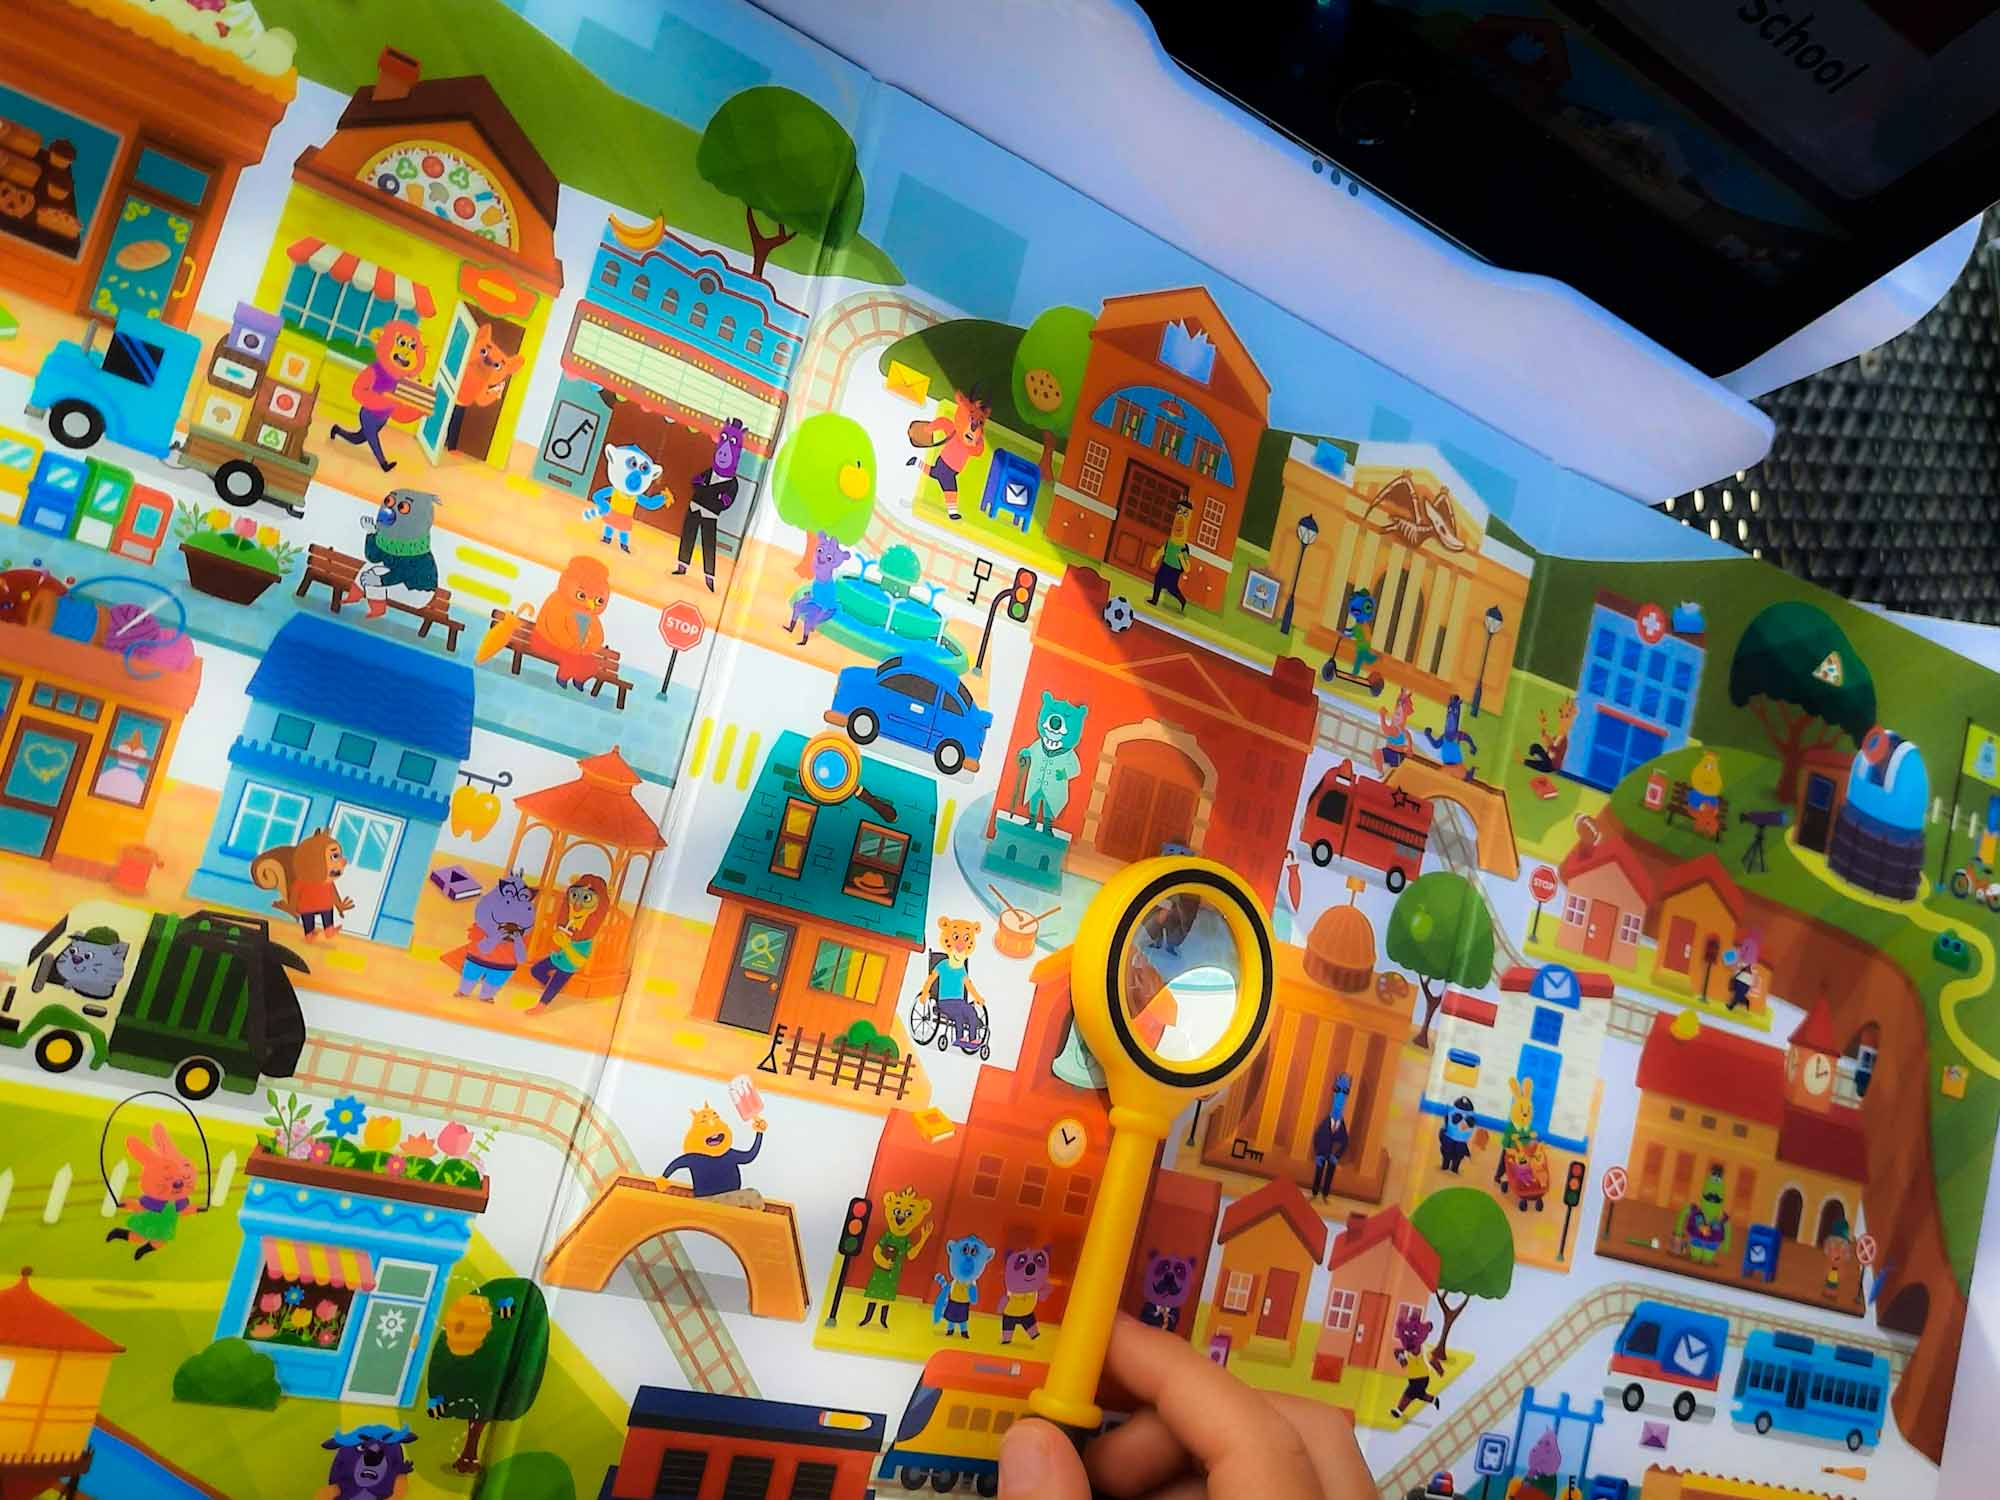 Close up of a colourful children's cartoon map of a town